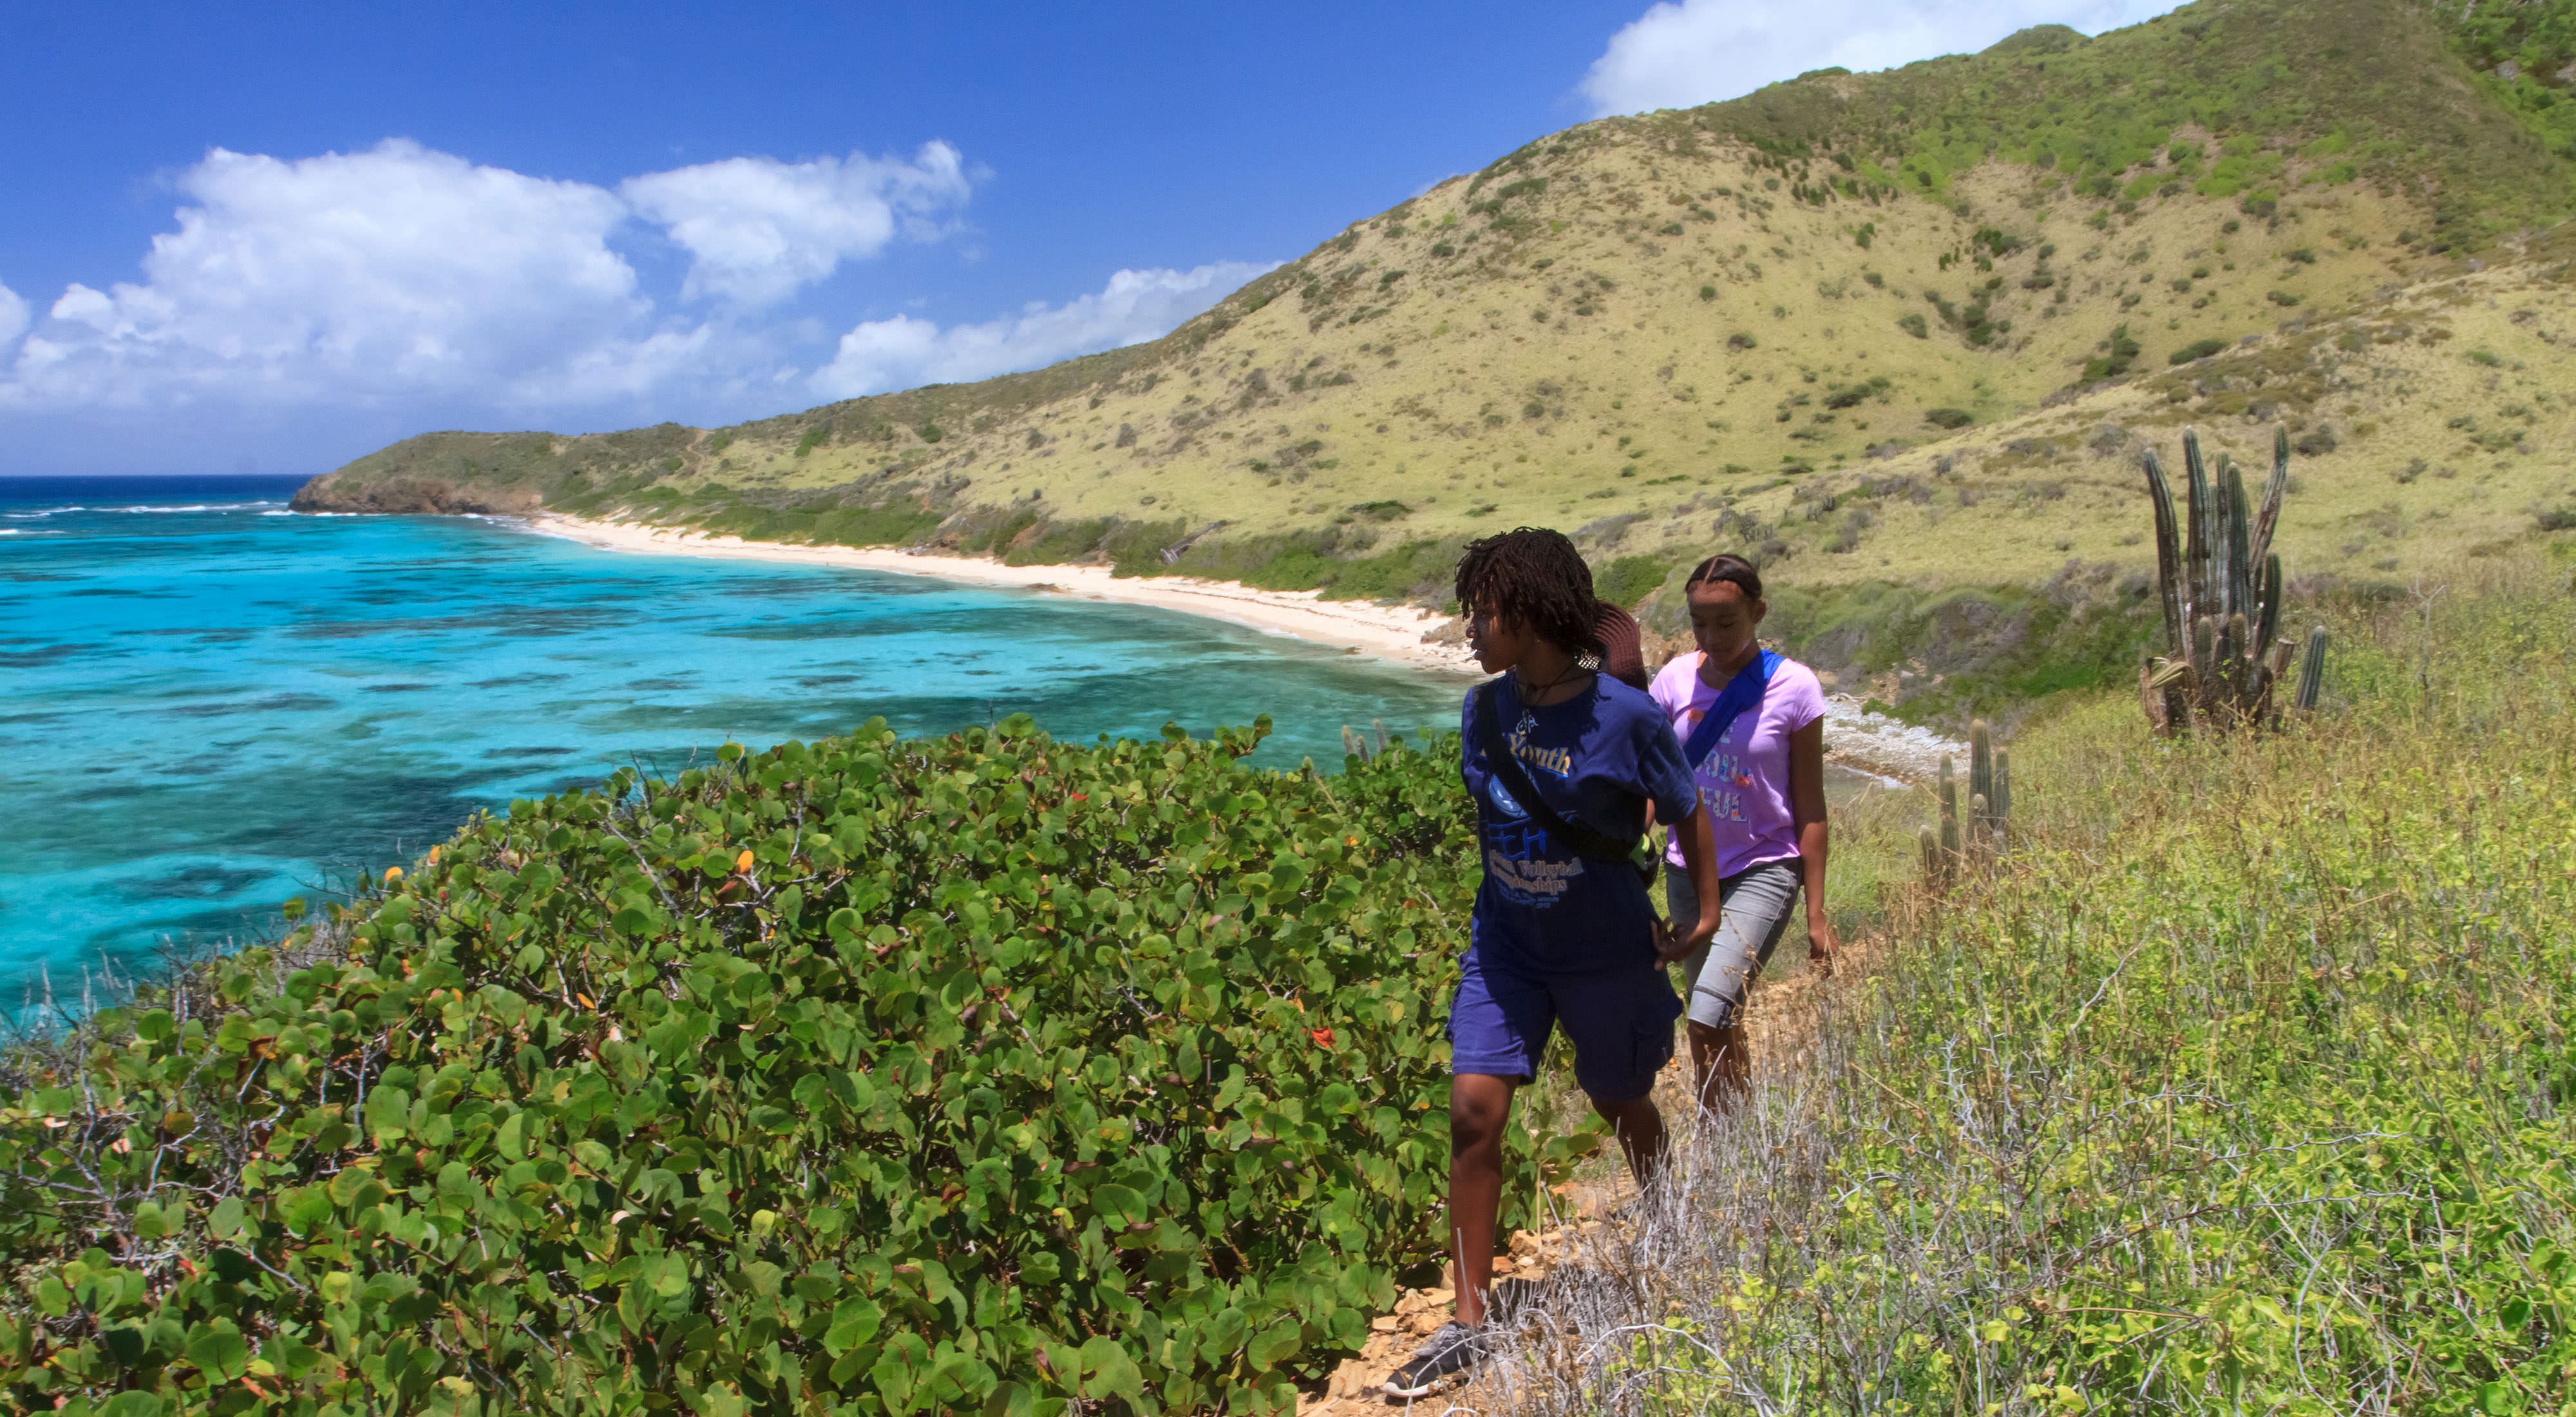 Kids hike along a trail on a hillside overlooking clear, turquoise waters.